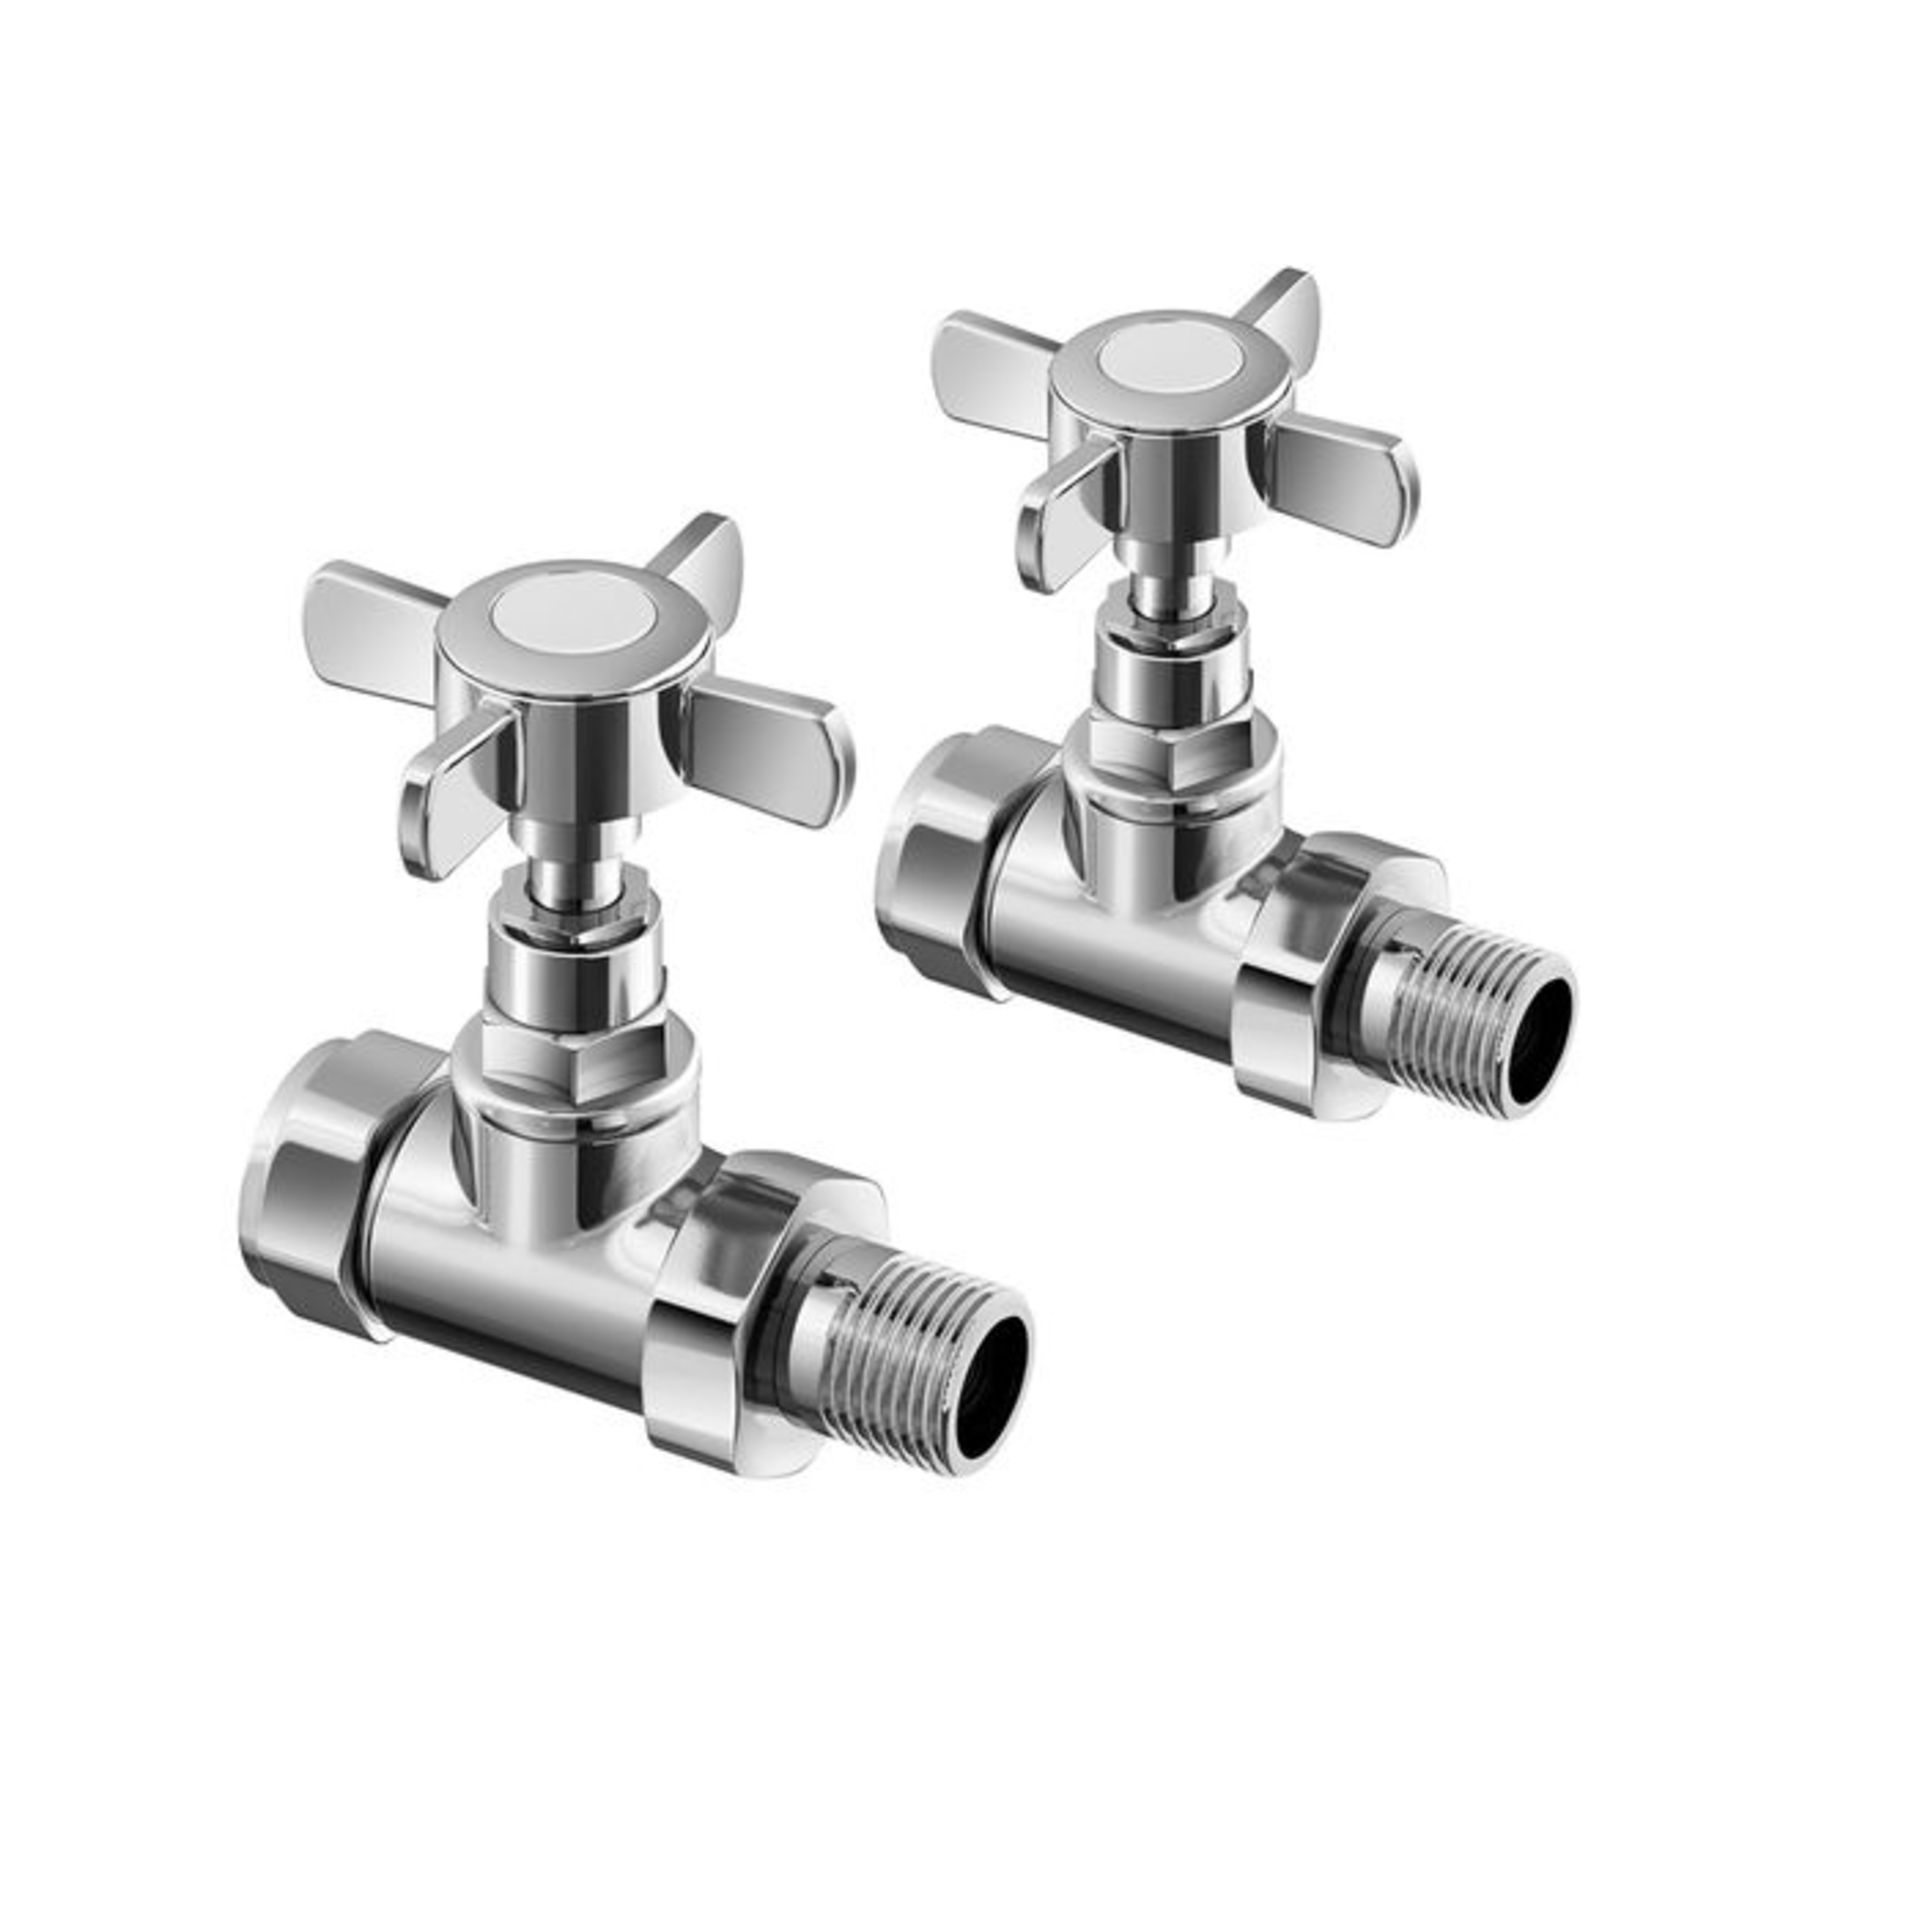 (R1036) 15mm Standard Connection Straight Polished Chrome Radiator Valves Chrome Plated Solid - Image 3 of 4